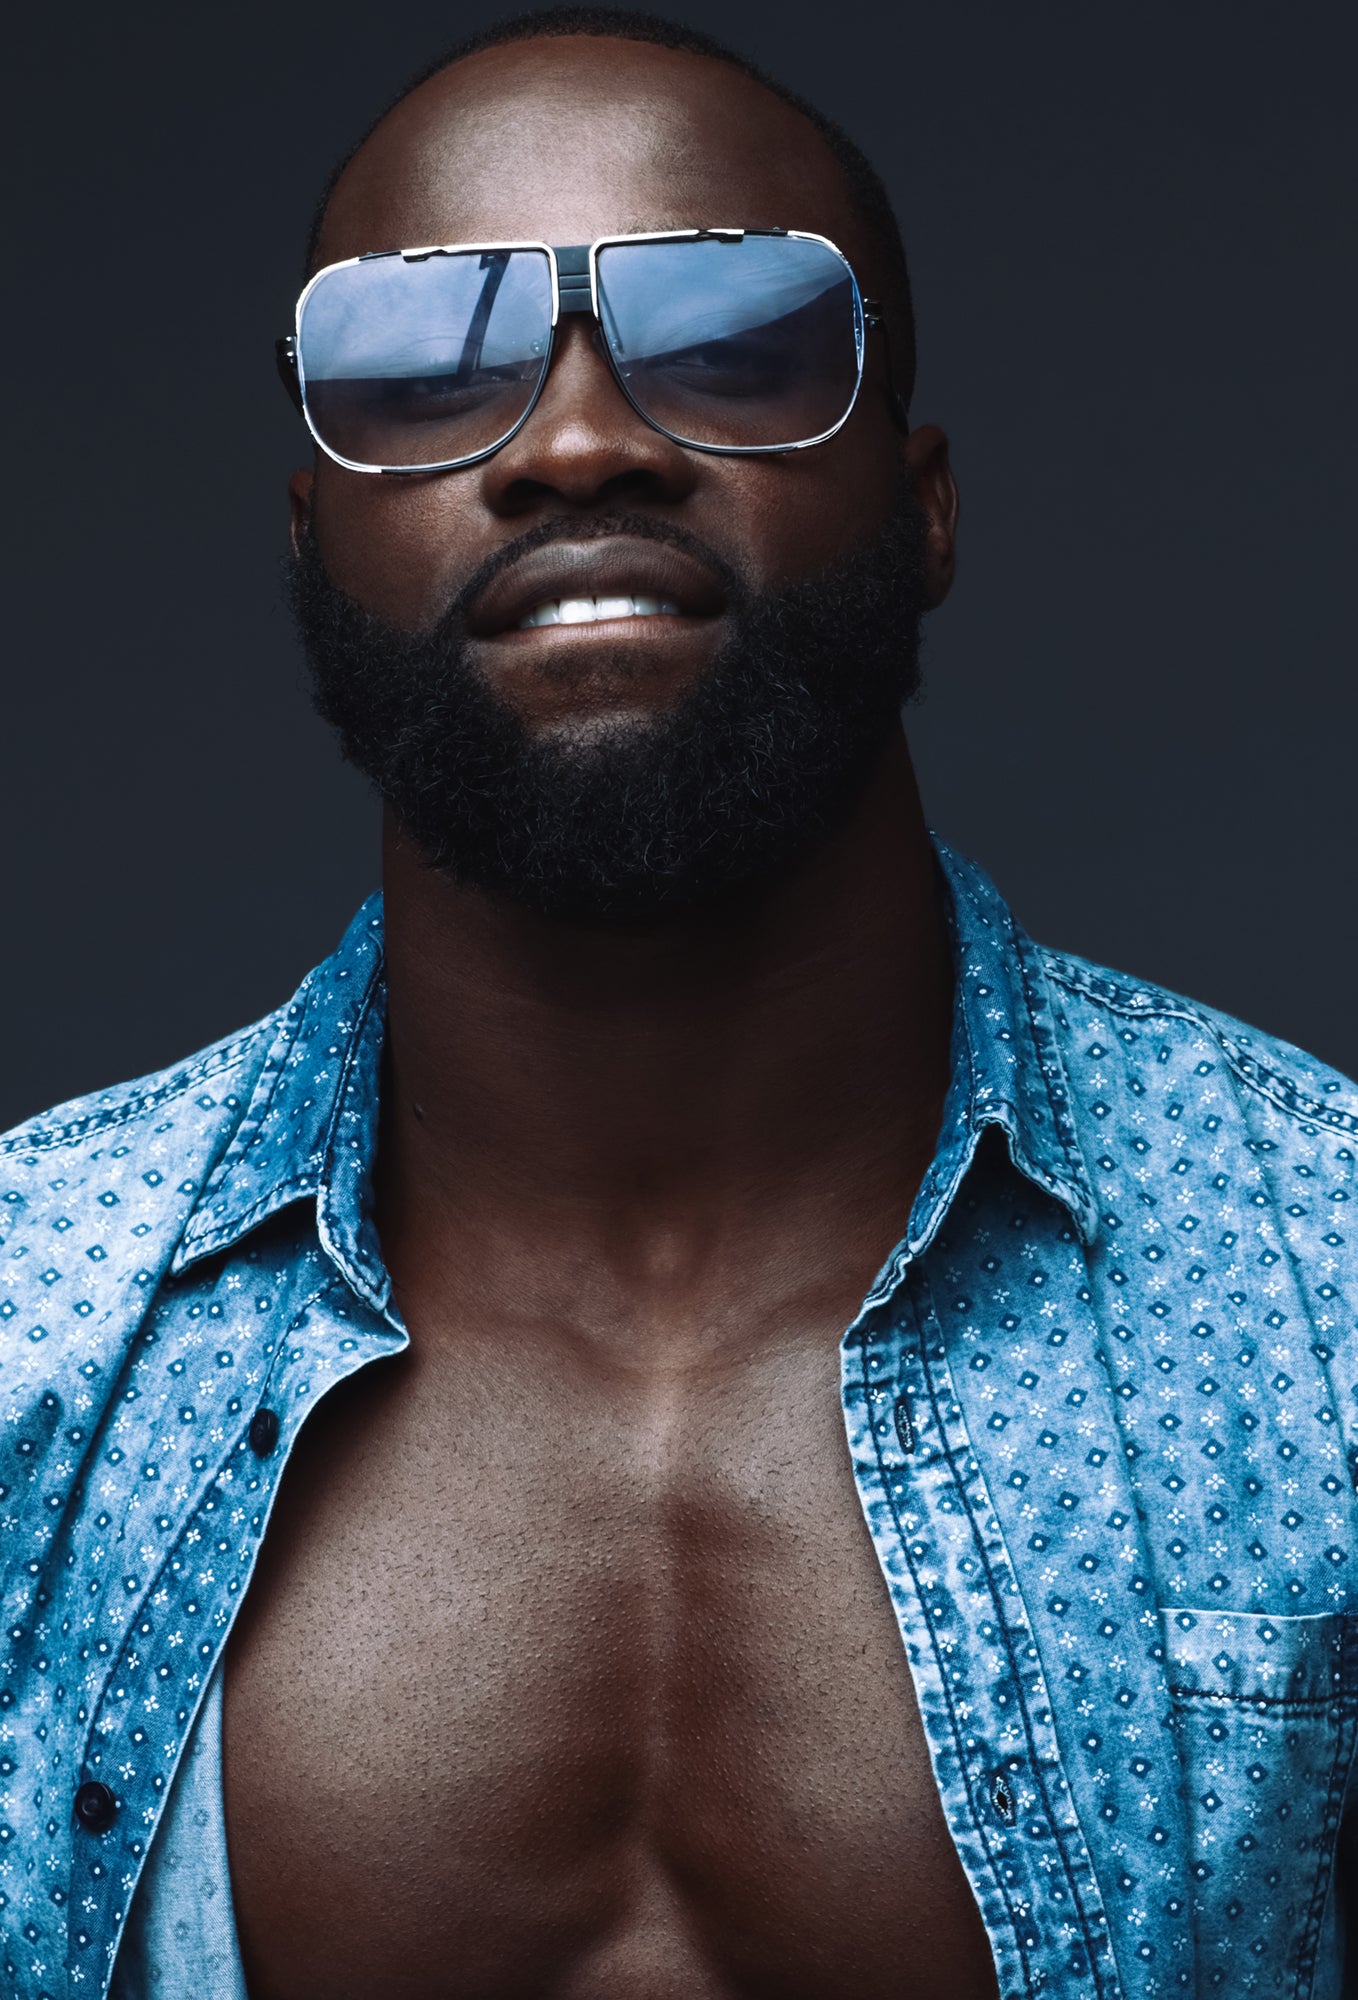 #MCM: Haitian Model Mcdonald Jean-Louis Is In the Running For The Hottest Chocolate Around
